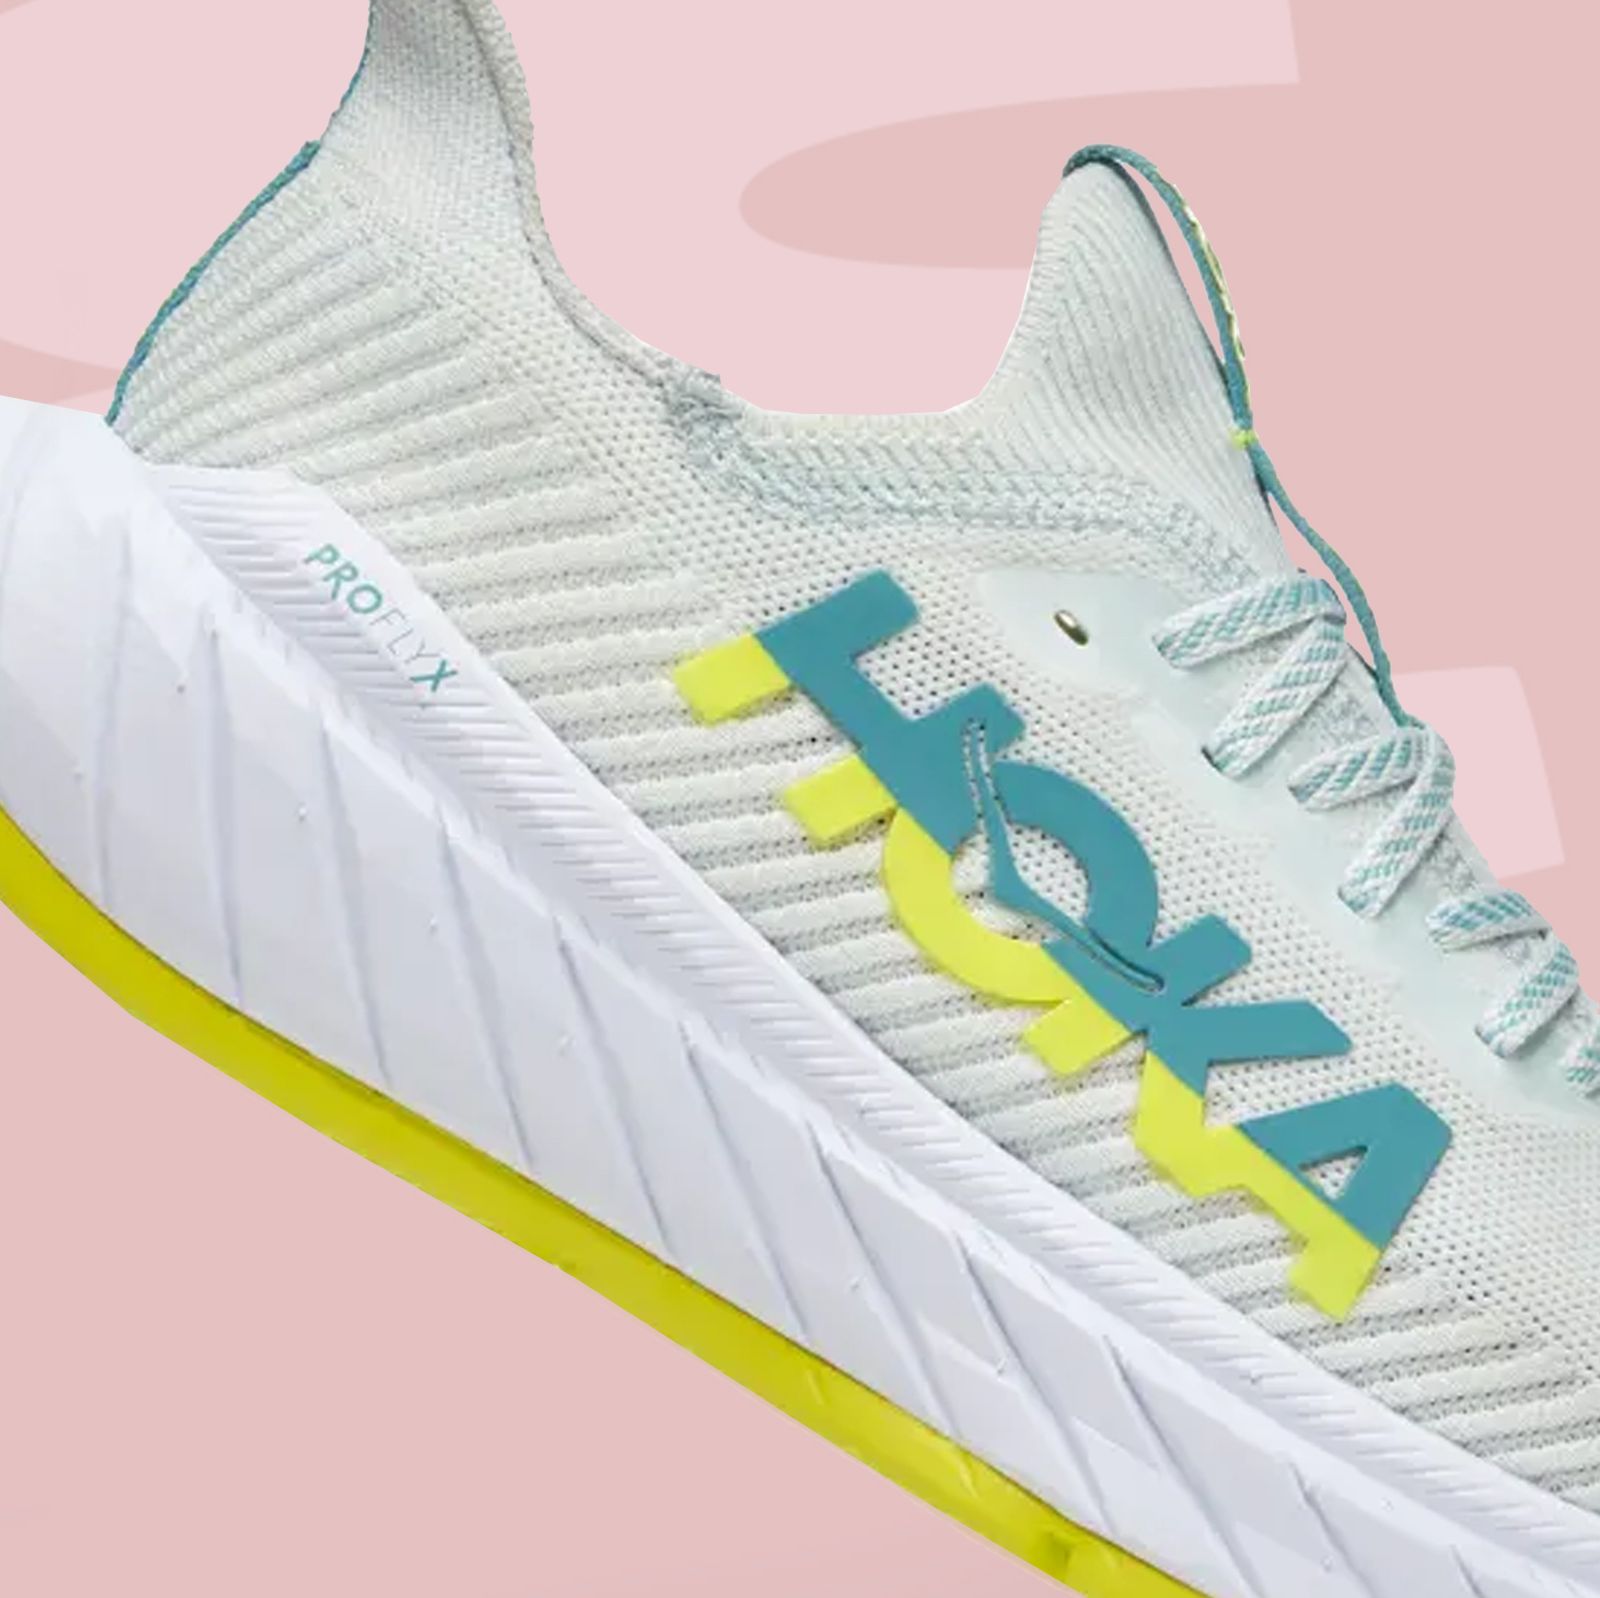 Hoka Is Having a Great President's Day Sale